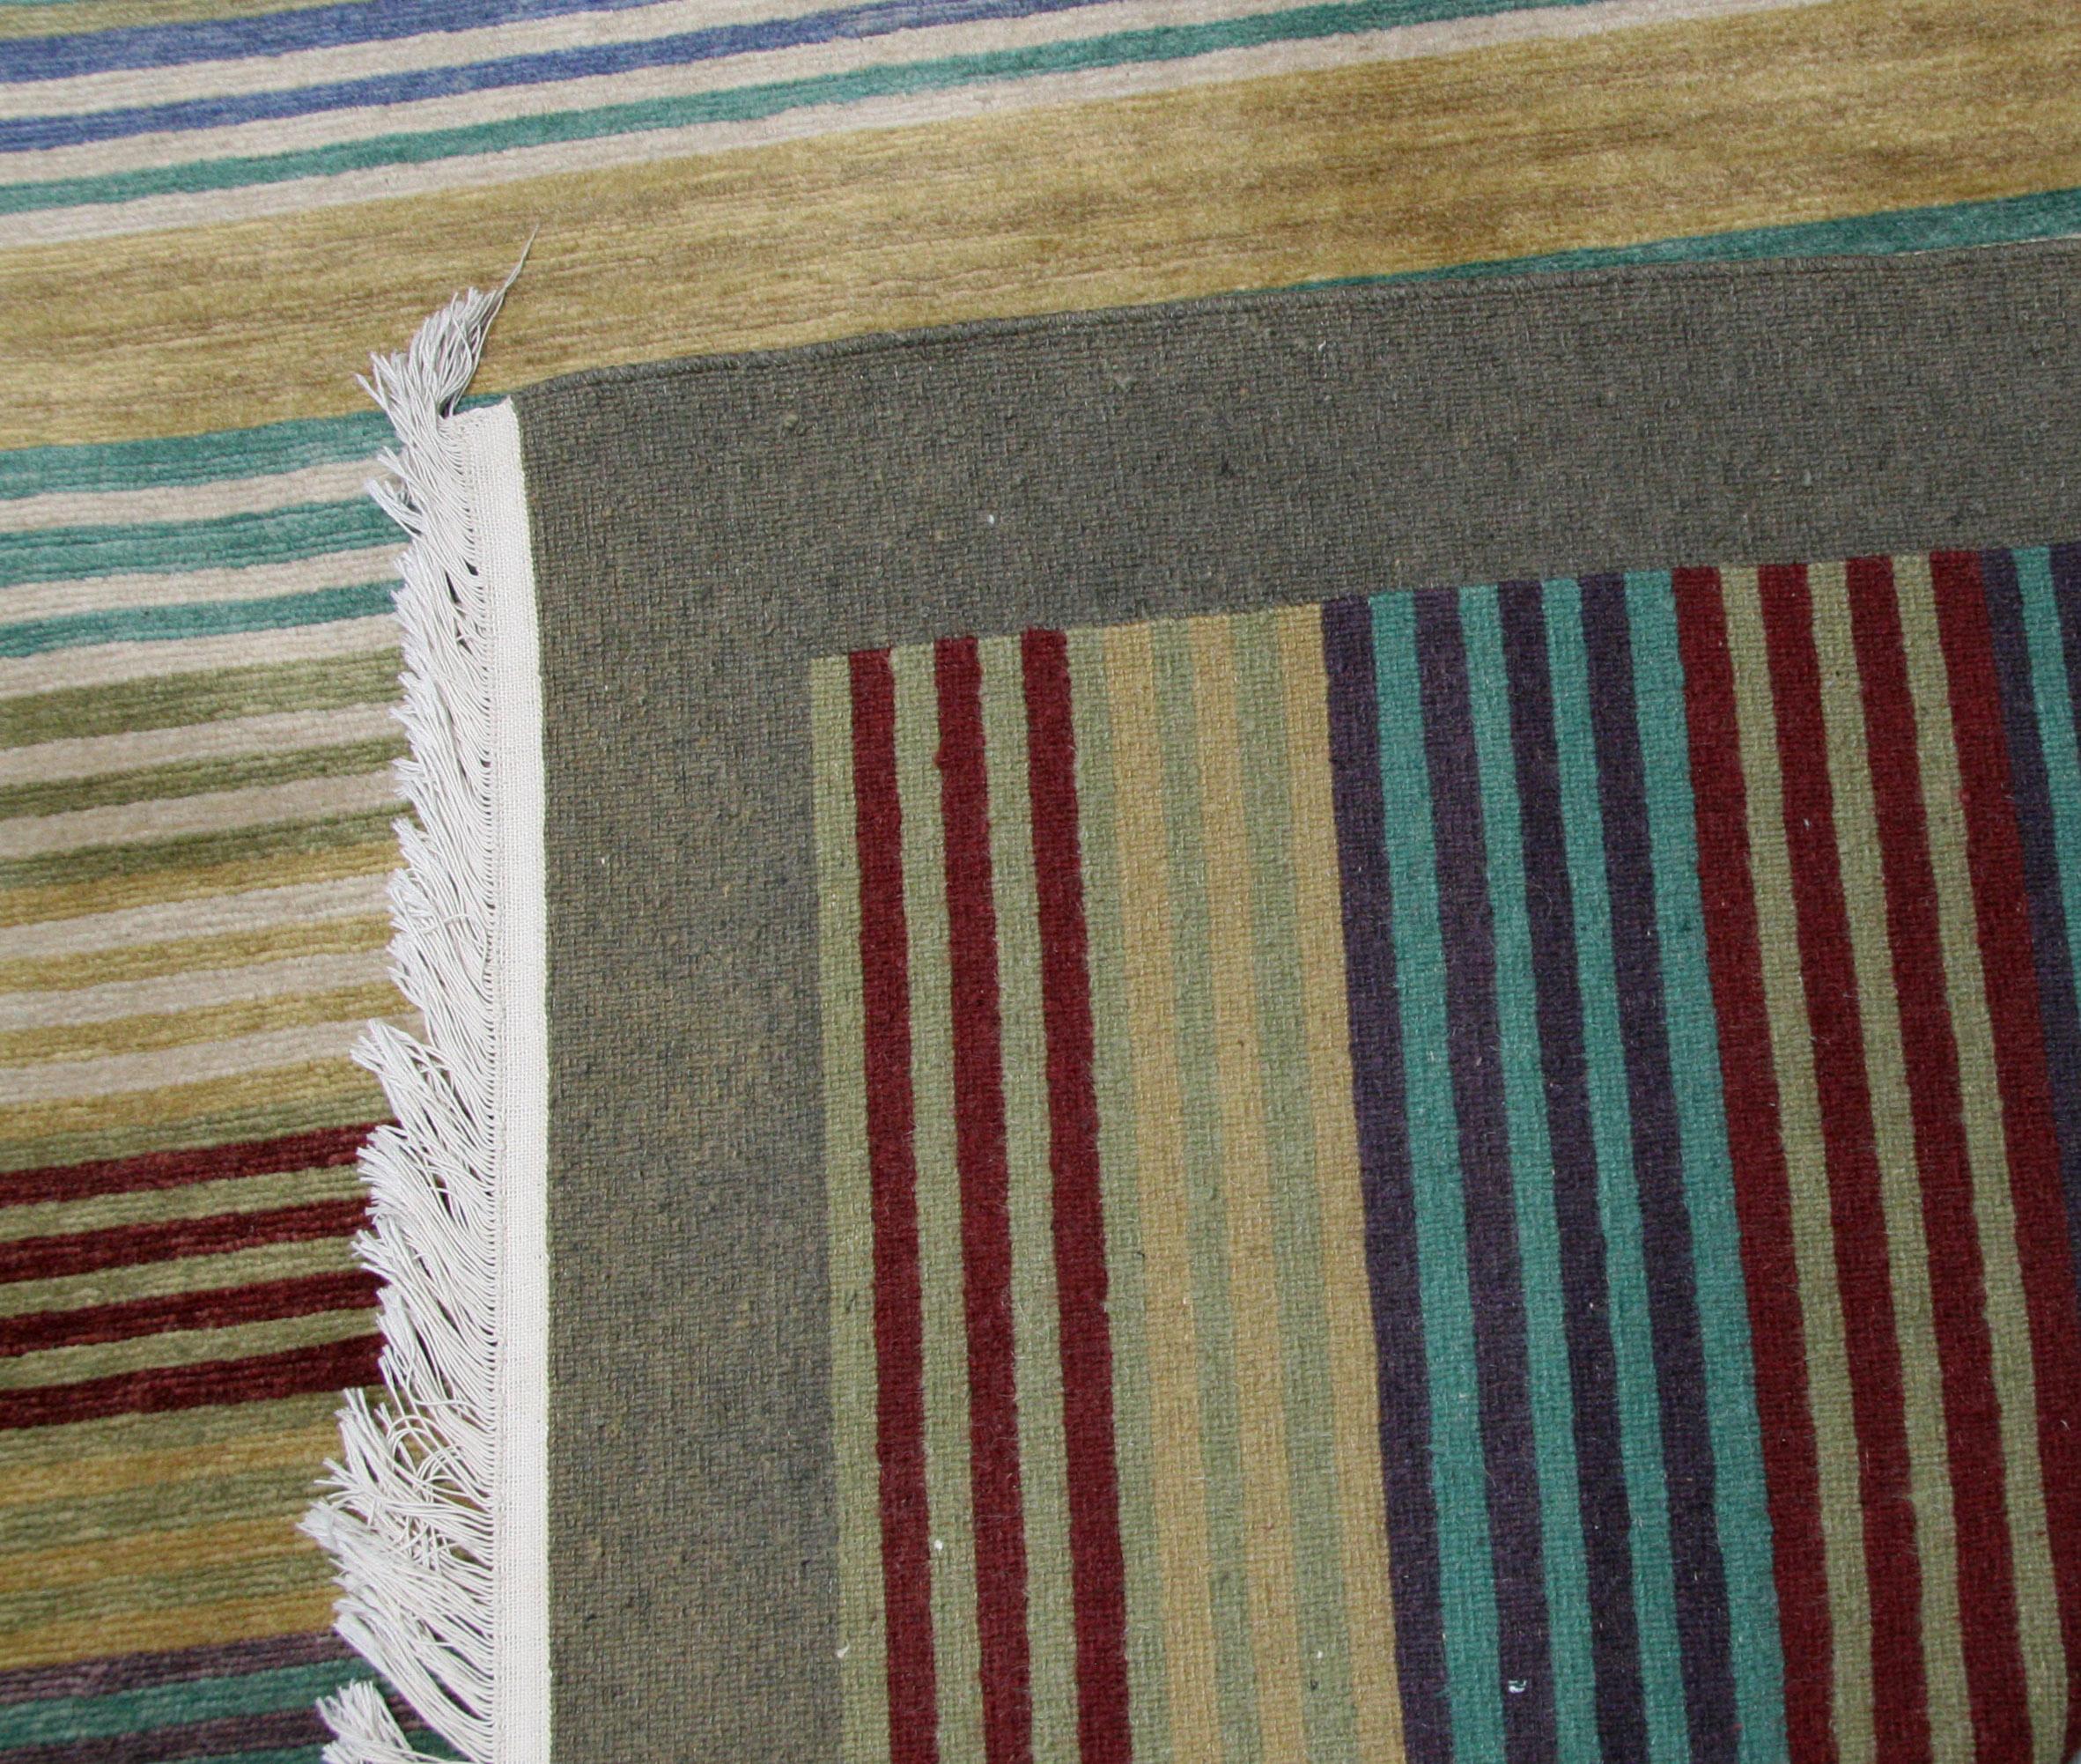 The look of a kilim in a wool pile rug. Multicolored stripes bring the look of a traditional kilim but with the dense pile and durability of a wool rug. A great family-friendly rug for casual living spaces. Hand knotted in India using wool dyed with